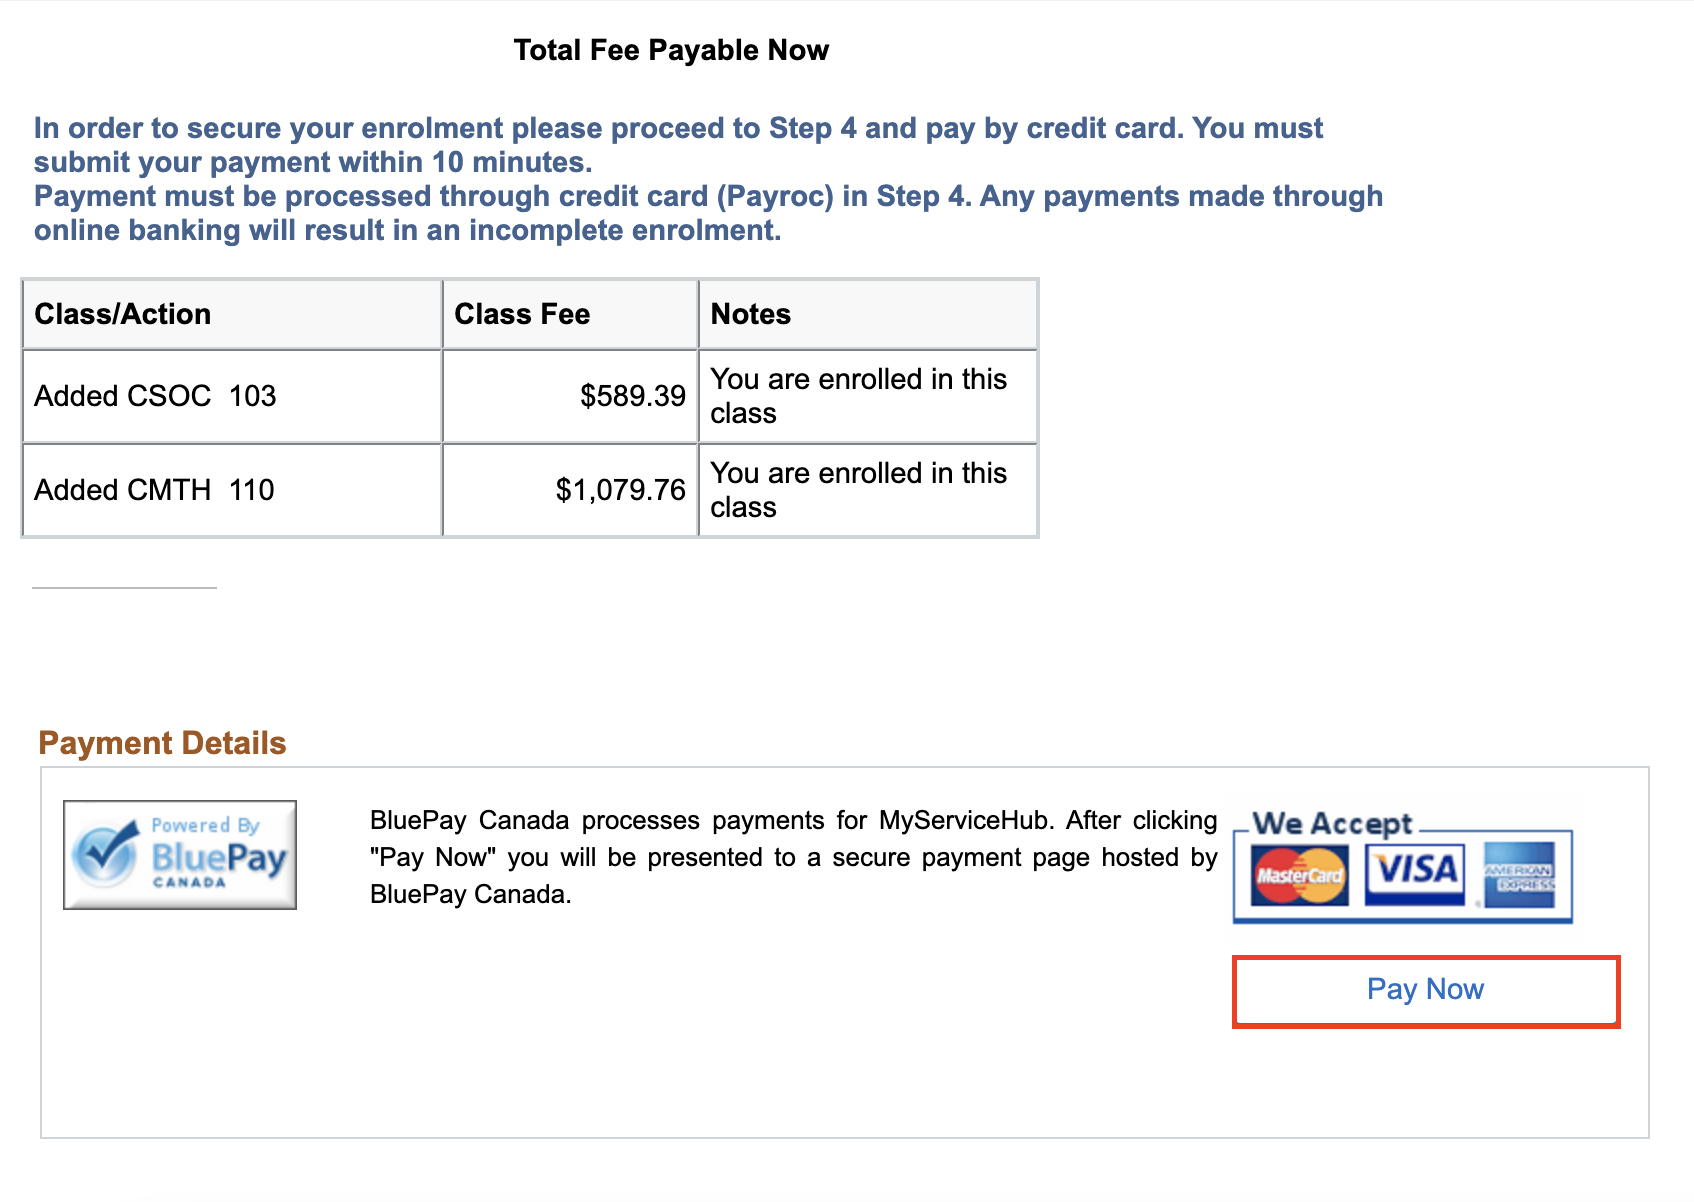 Total Fee Payable Now section with list of classes, class fees and Pay Now button